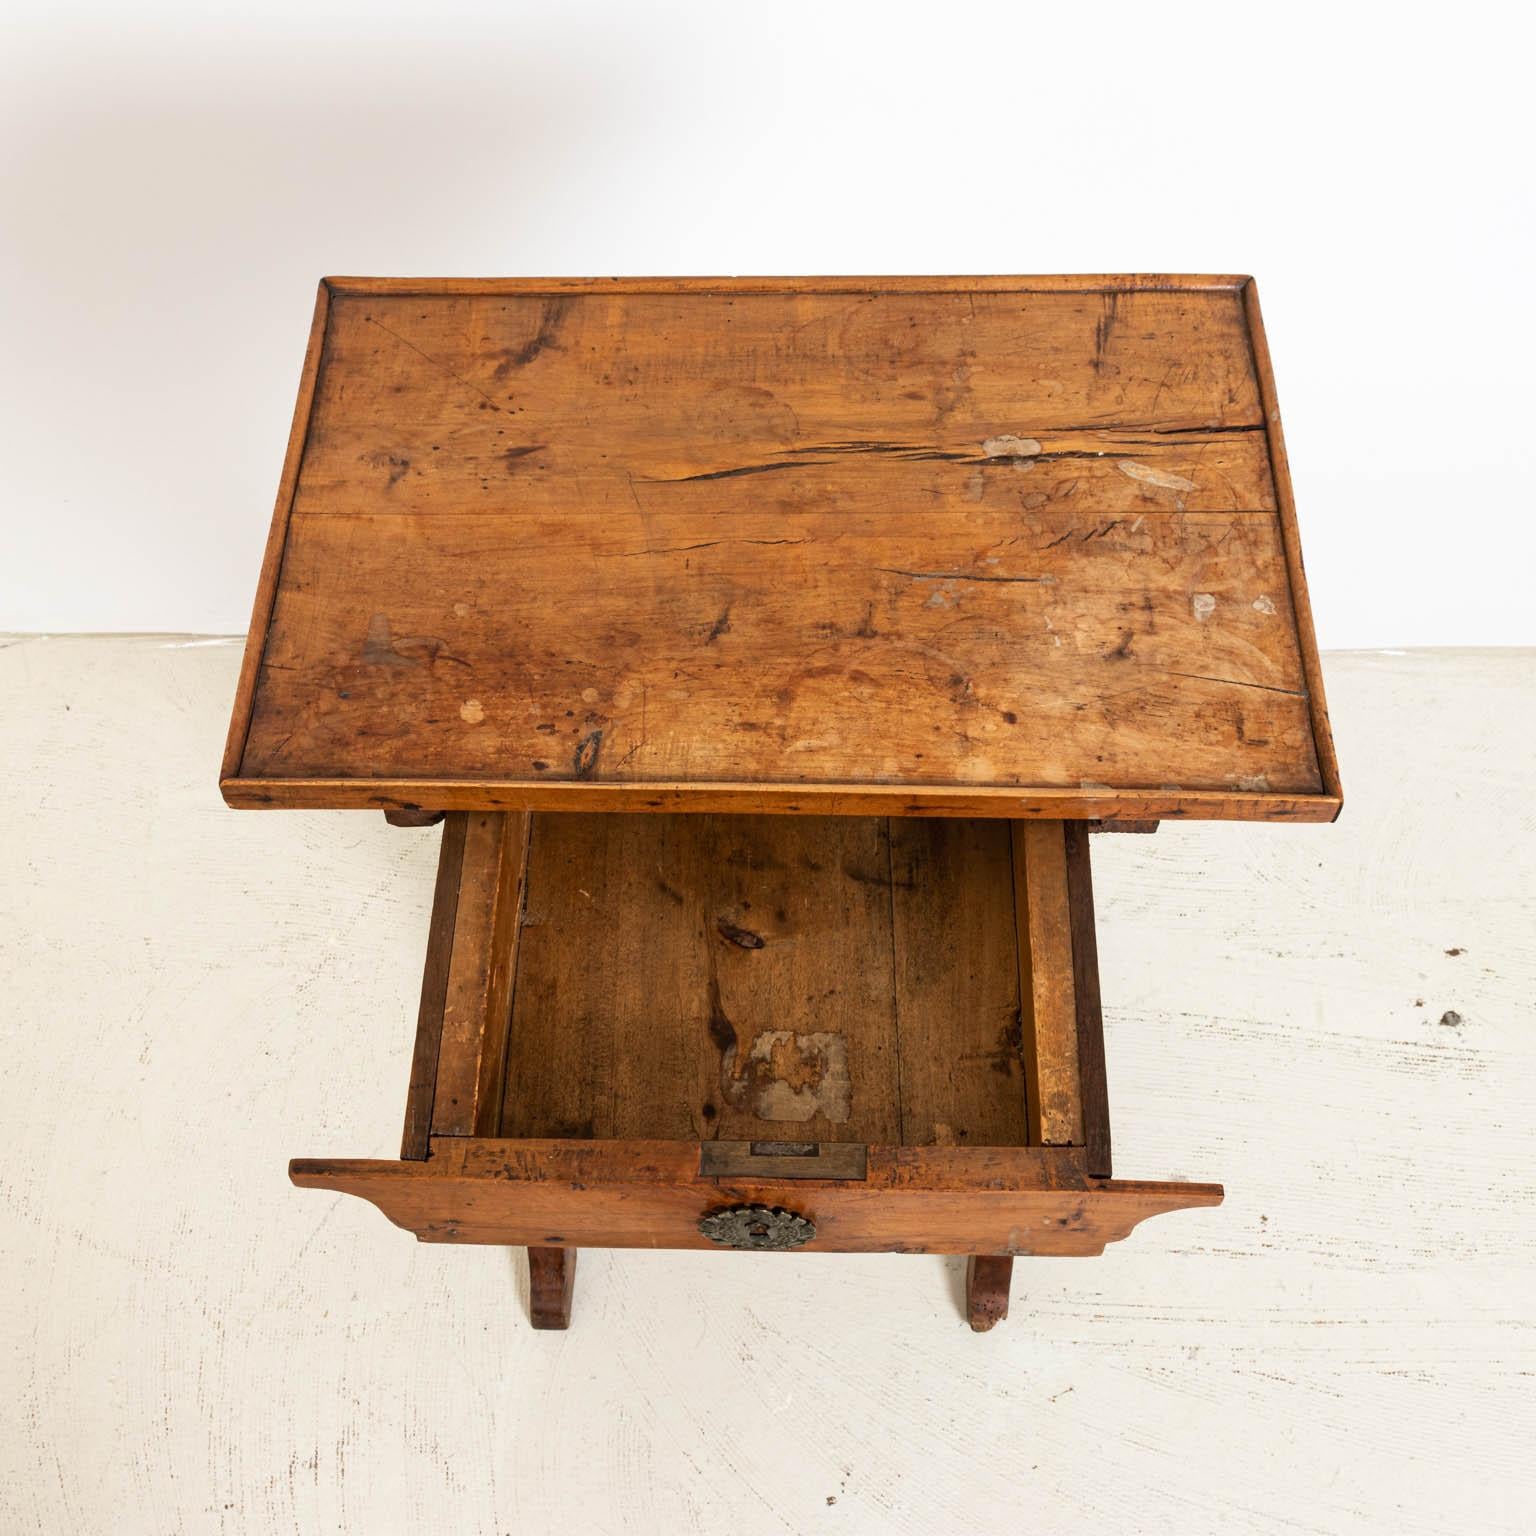 French fruitwood side table with drawer, circa 19th century. Please note of wear consistent with age including wear to top surface and scratches on top. There is also slight wear to finish throughout.